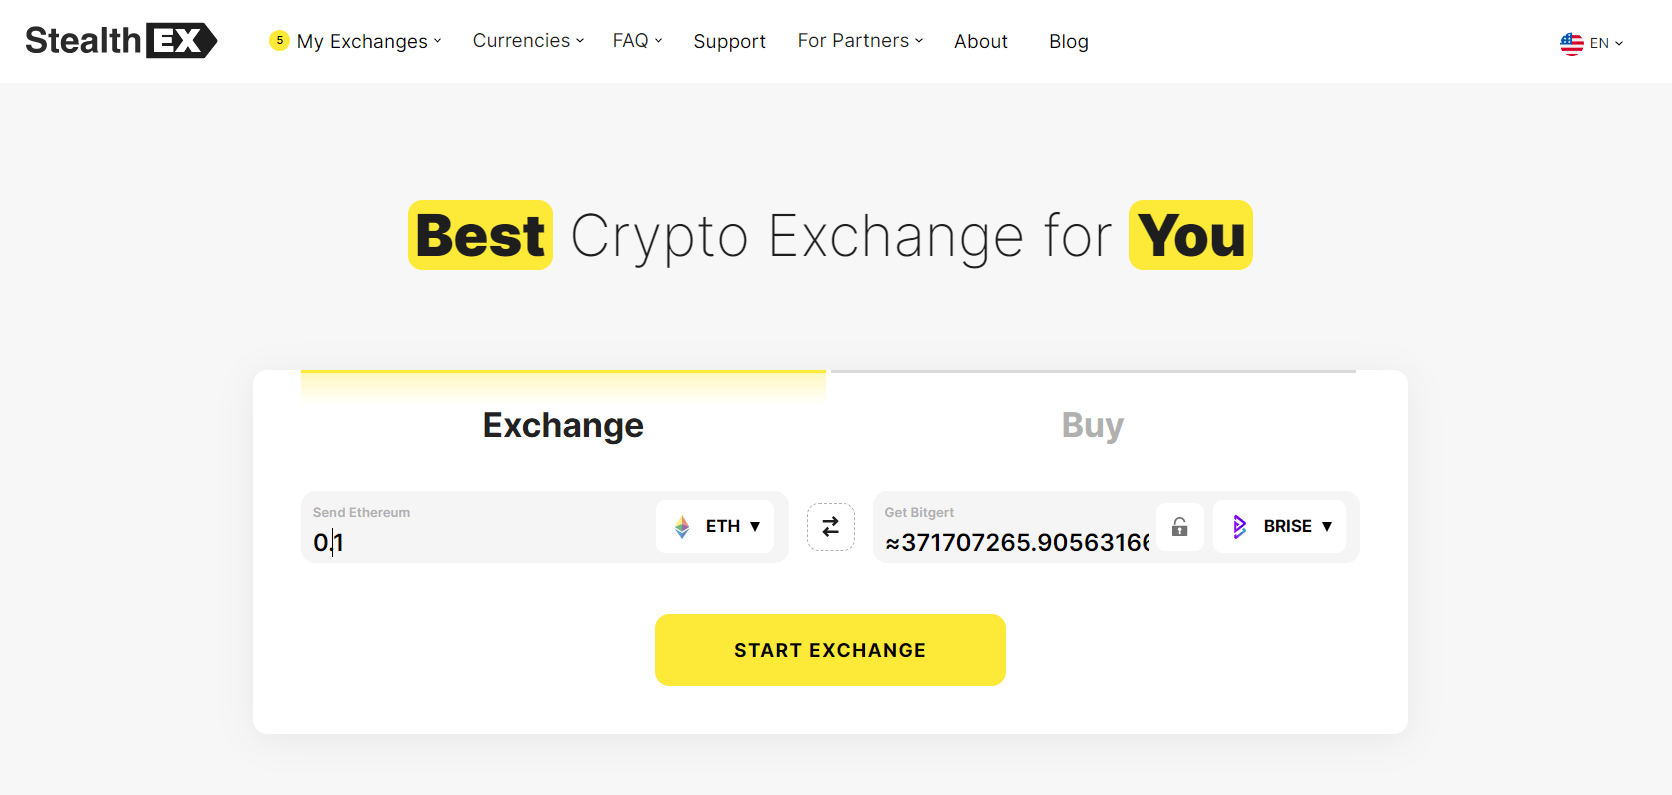 how to buy brise crypto